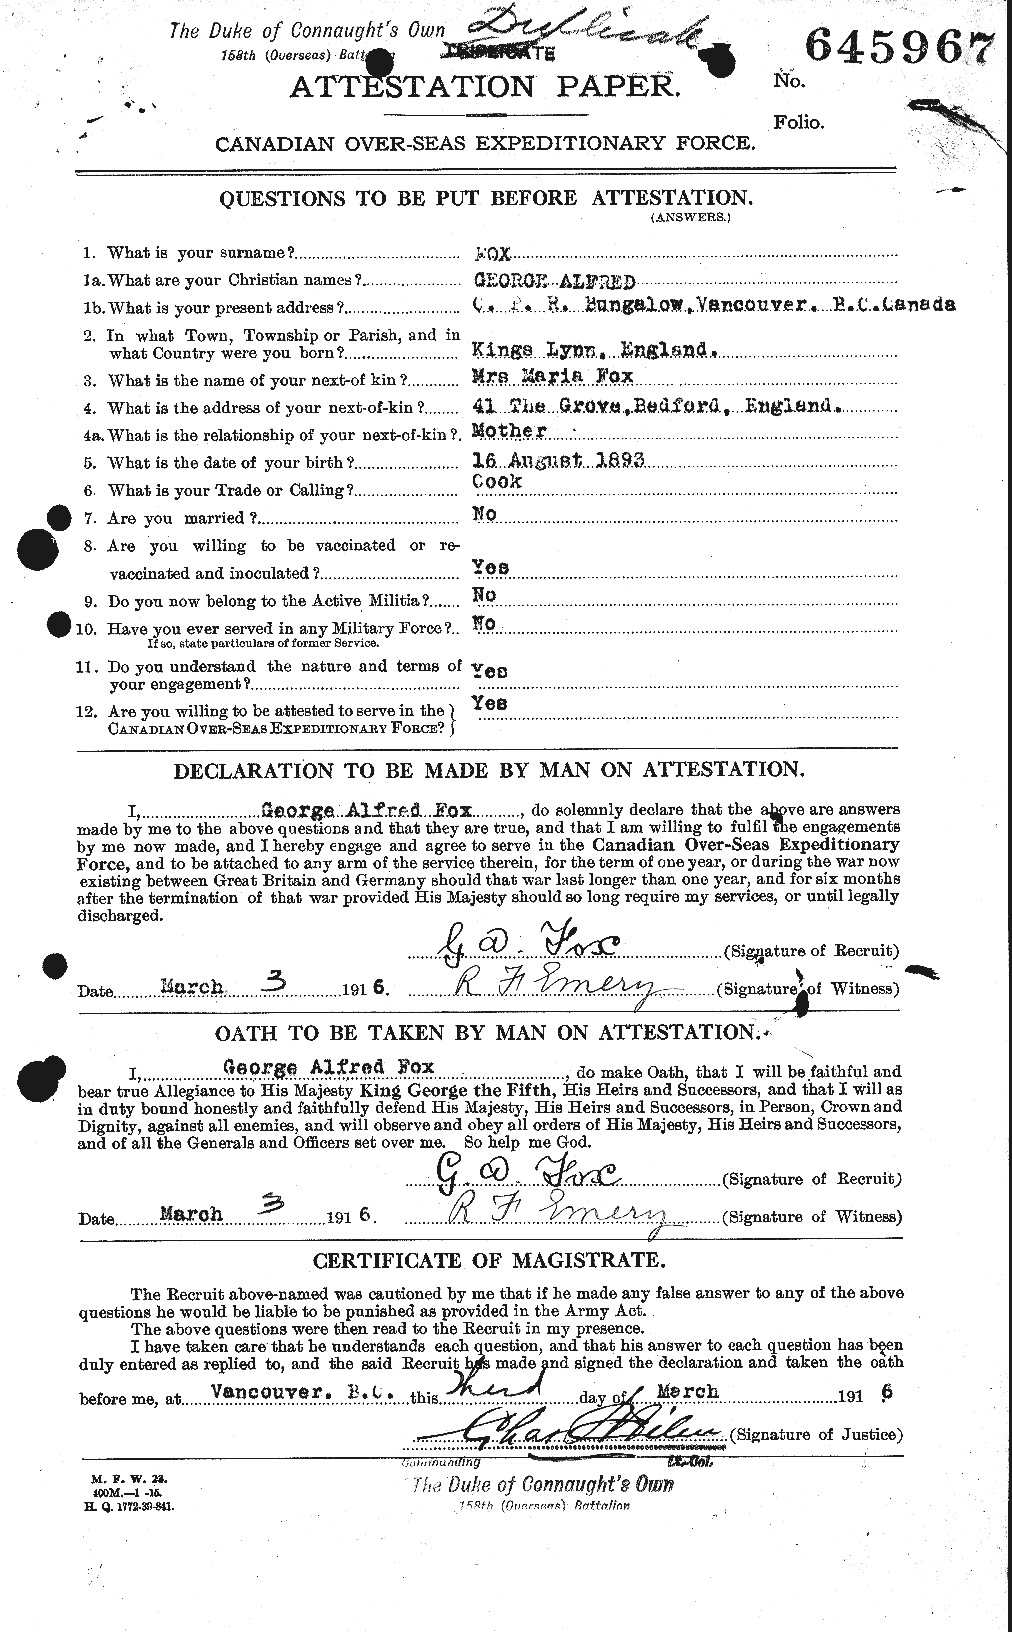 Personnel Records of the First World War - CEF 332484a